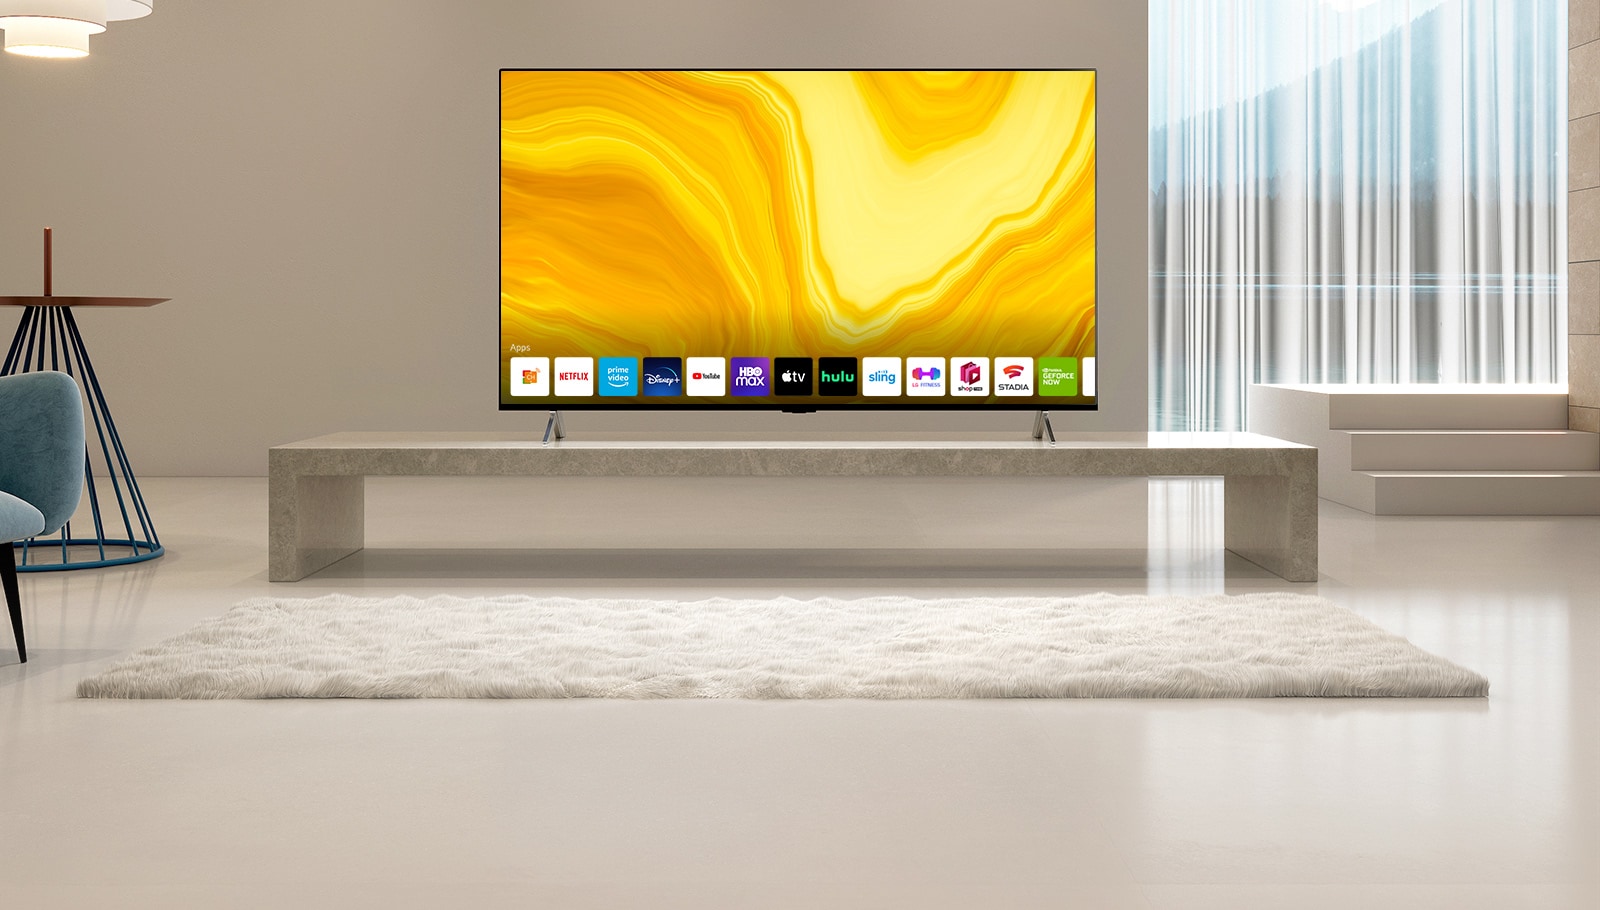 There, a list of LG QNED home screen graphical user interfaces is displayed by scrolling down. The scene changes to show the television set up in the yellow living room.